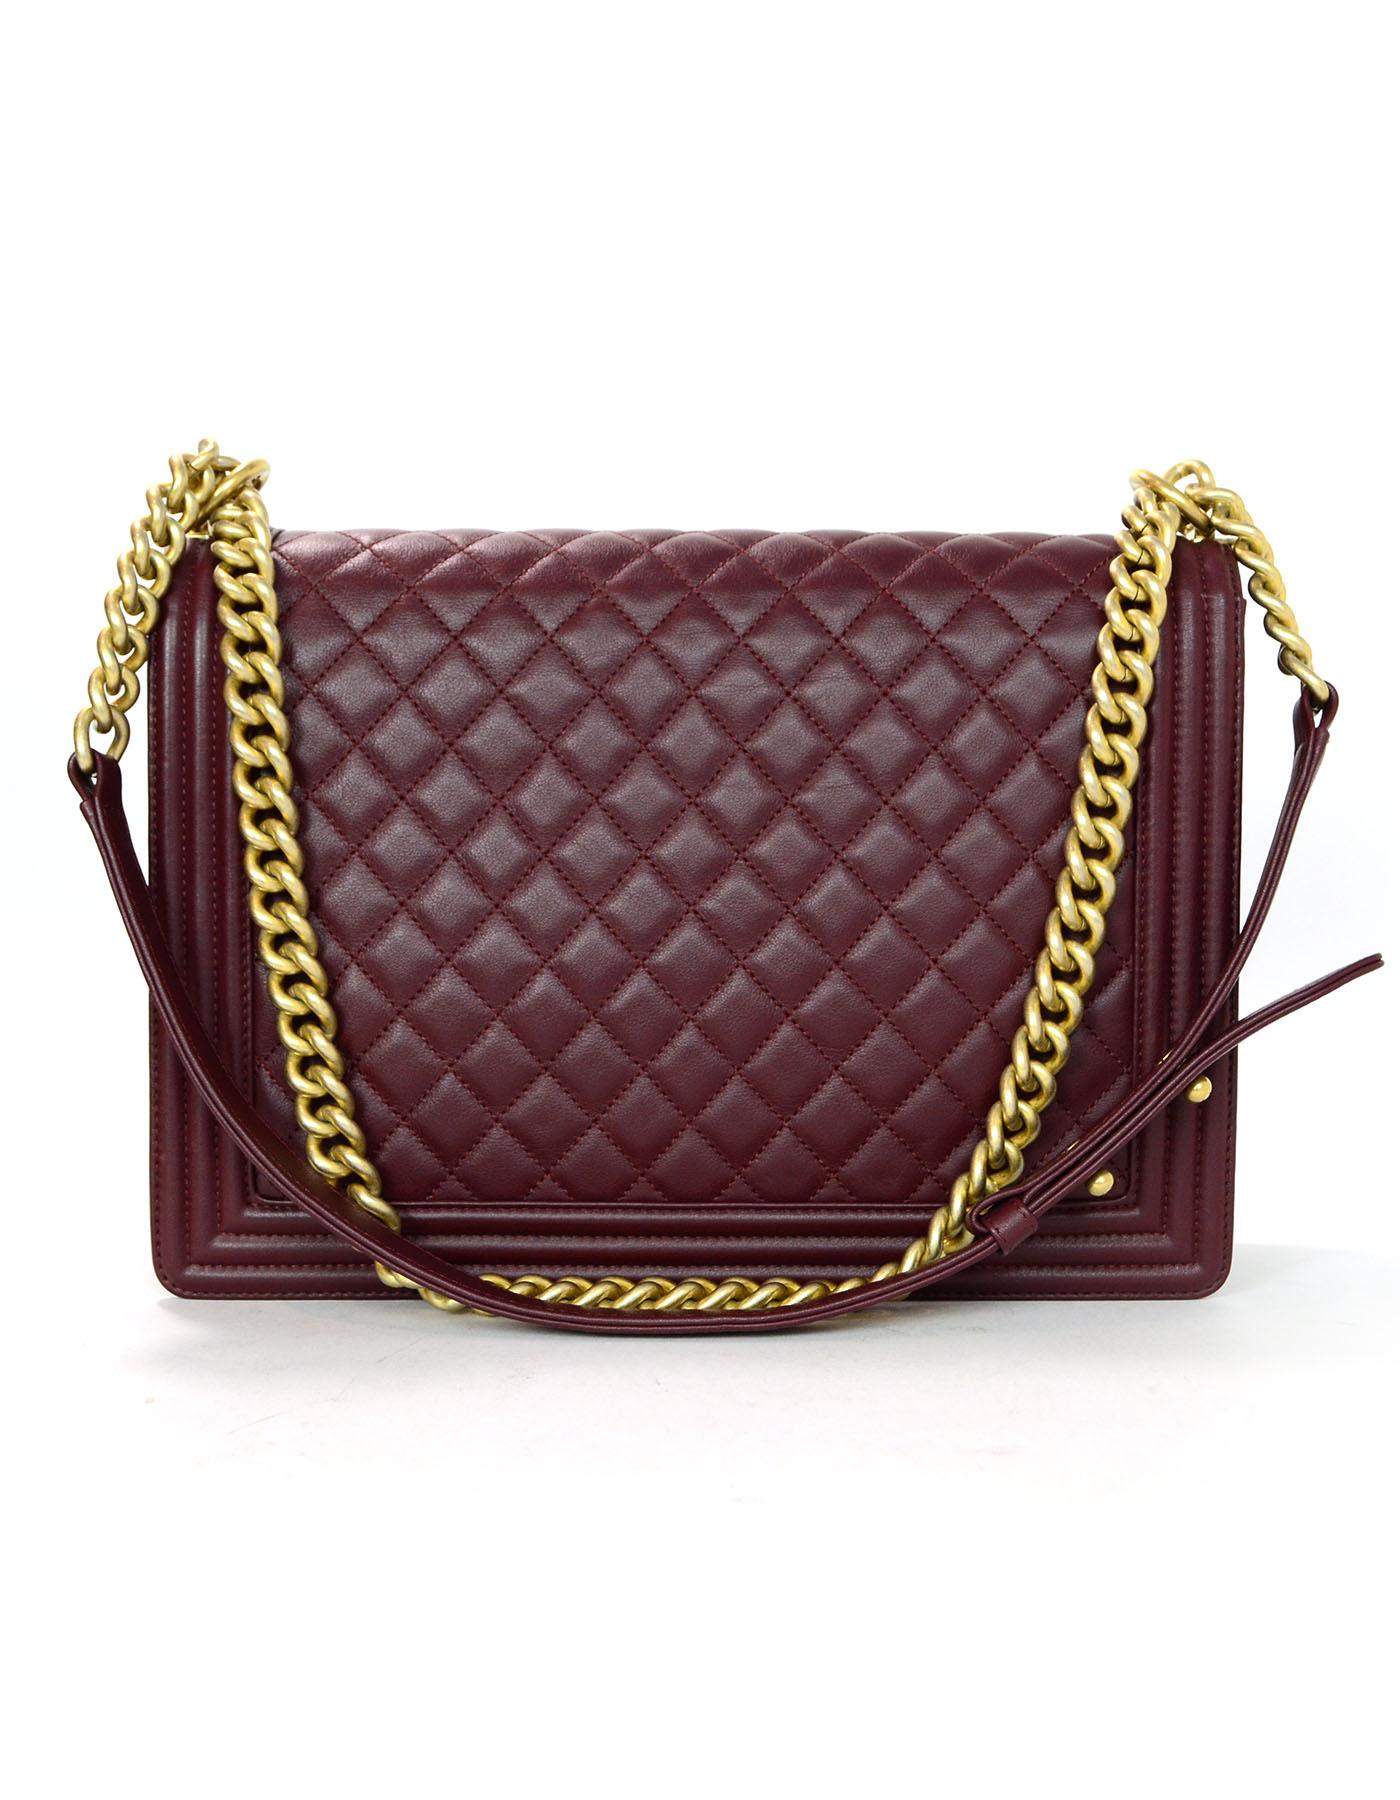 Chanel Burgundy Lambskin Leather Large Boy Bag. 
Features matte goldtone and burgundy lambskin leather strap that can be worn doubled on the shoulder, or singled to be used cross-body

Made In: Italy
Year of Production: 2017-2018
Color: